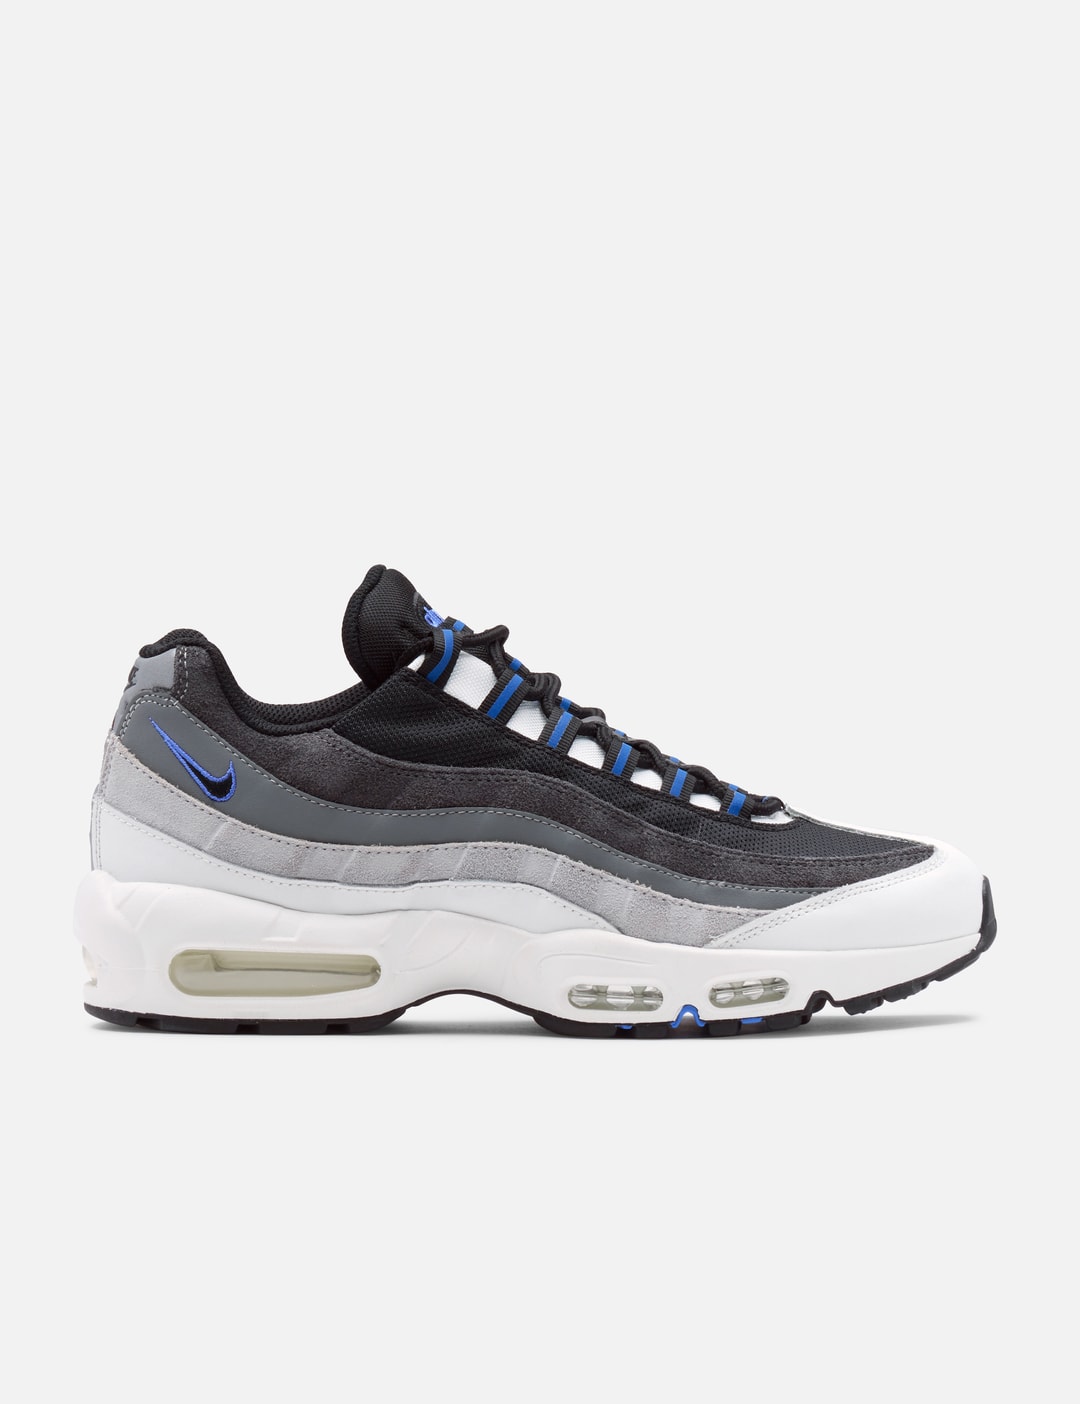 zoete smaak Graag gedaan Faeröer Nike - Nike Air Max 95 | HBX - Globally Curated Fashion and Lifestyle by  Hypebeast